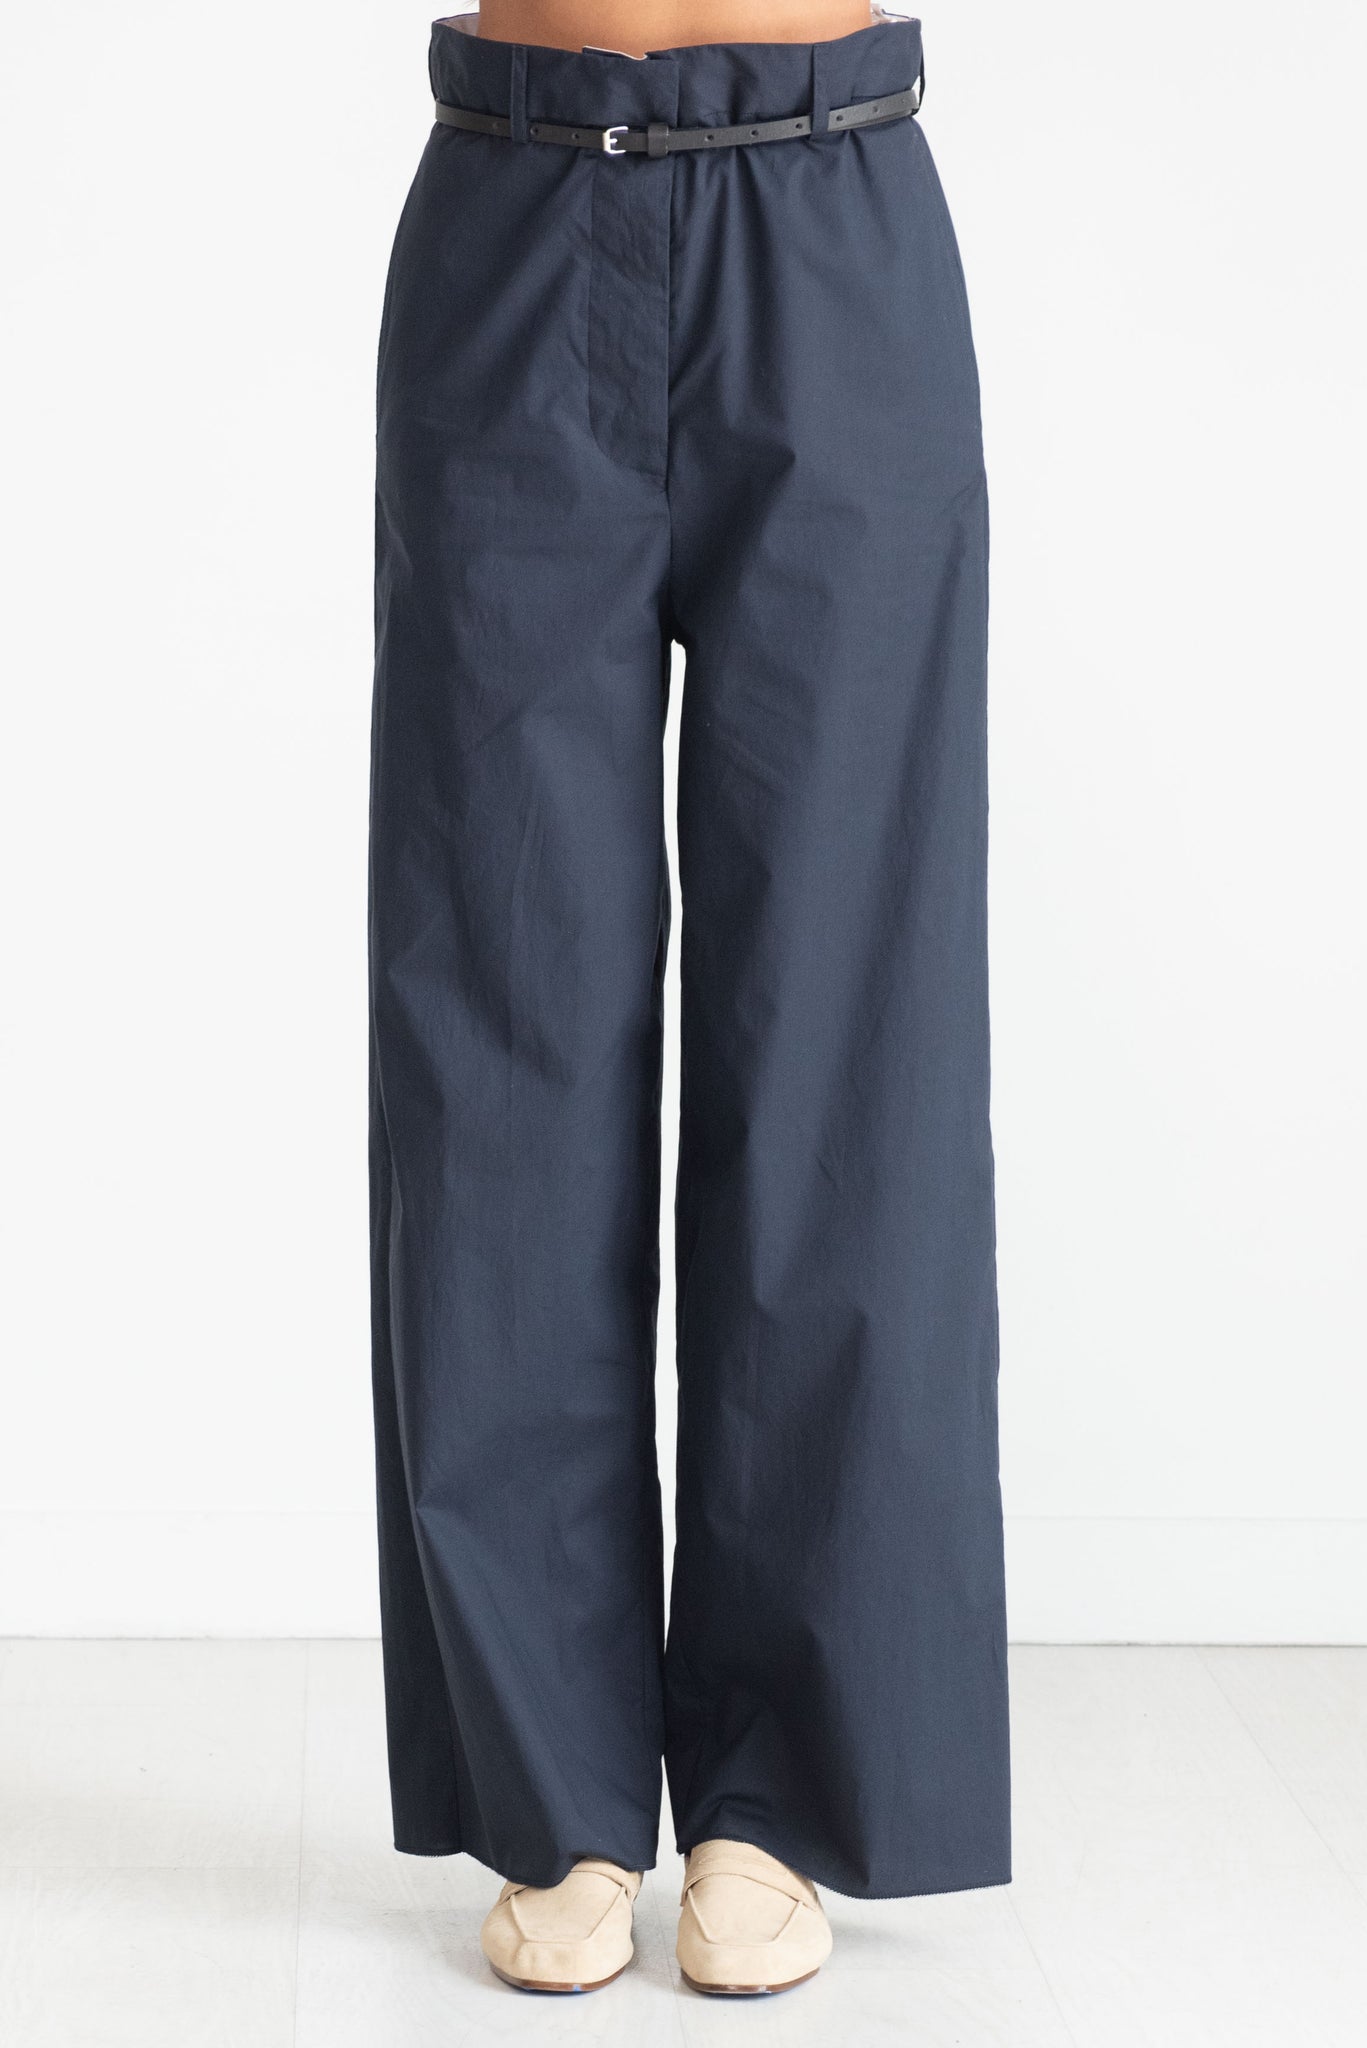 Hache - Freestyle Pants, Navy